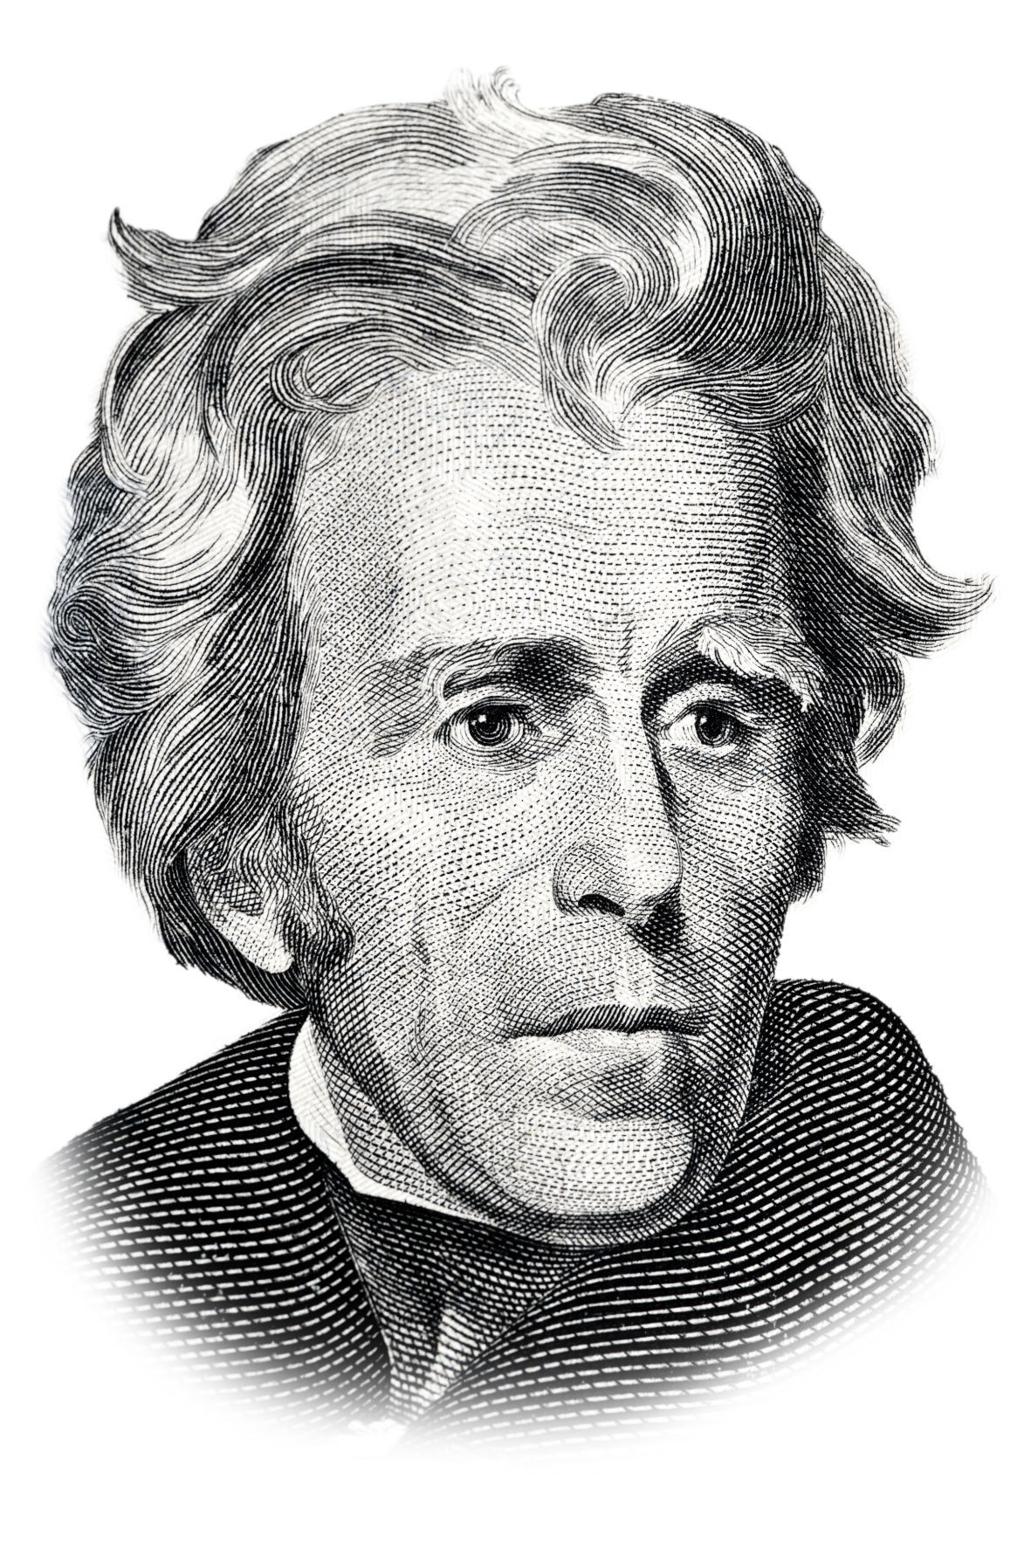 Andrew Jackson Drawing / There are 2,400+ professionals named andrew